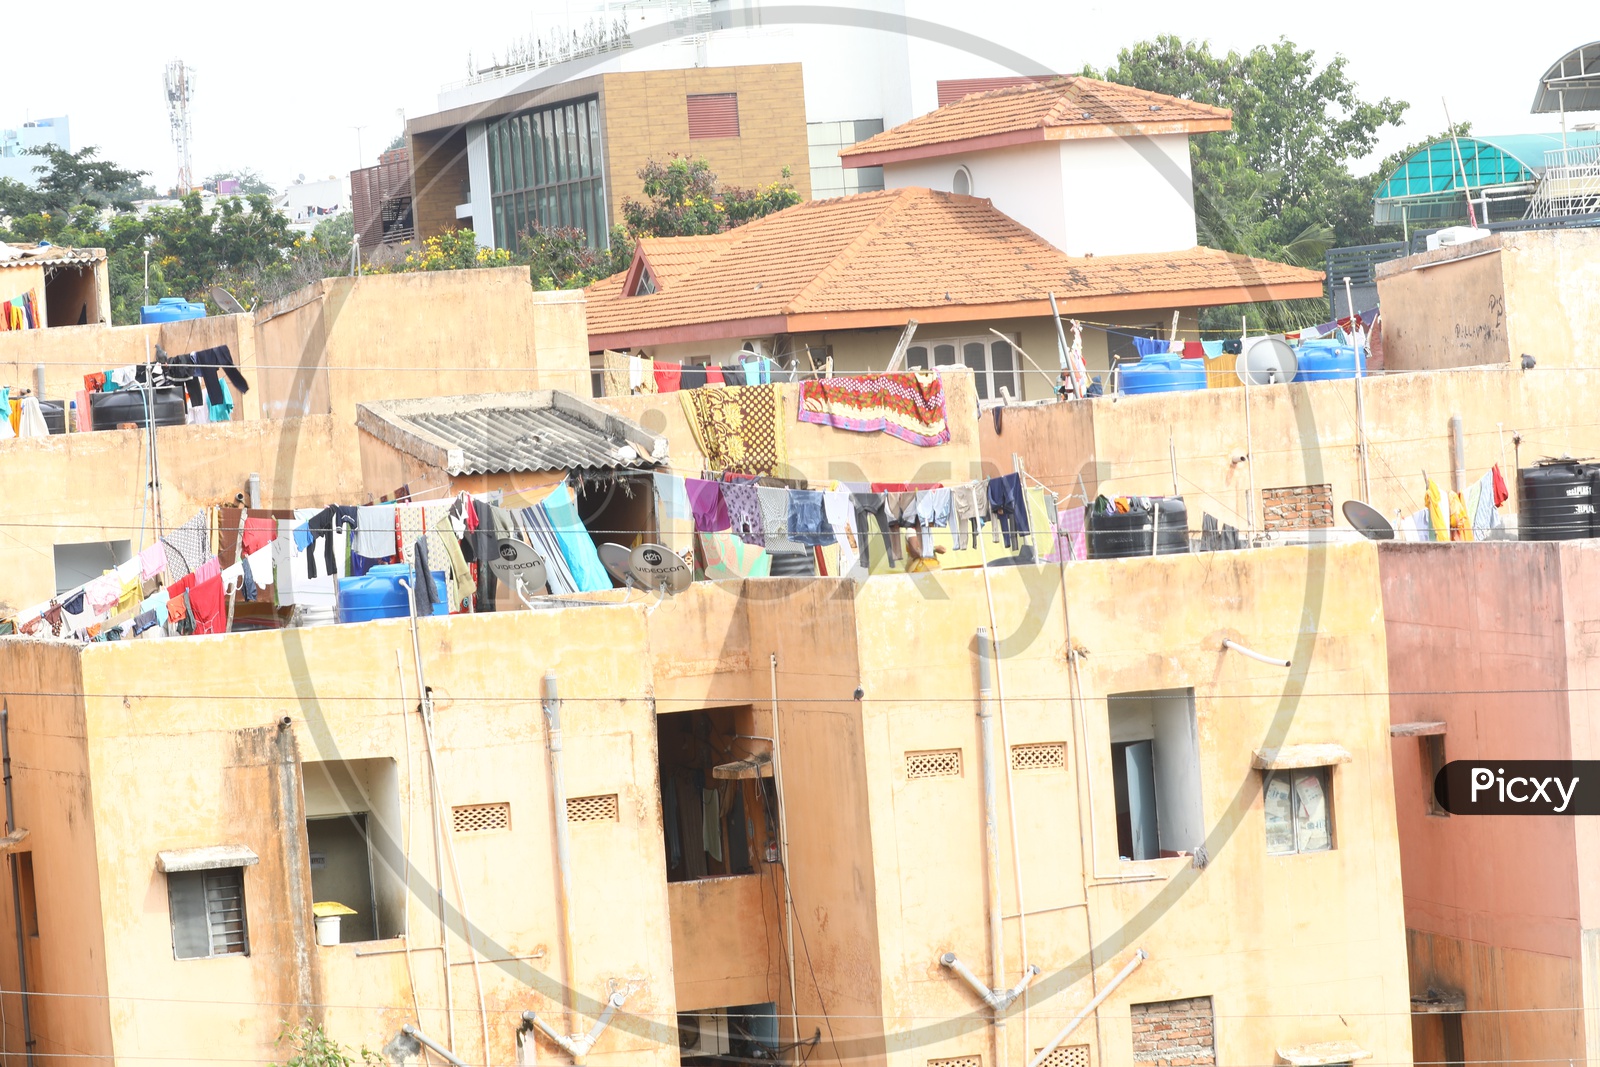 Clothes being dried on the terrace